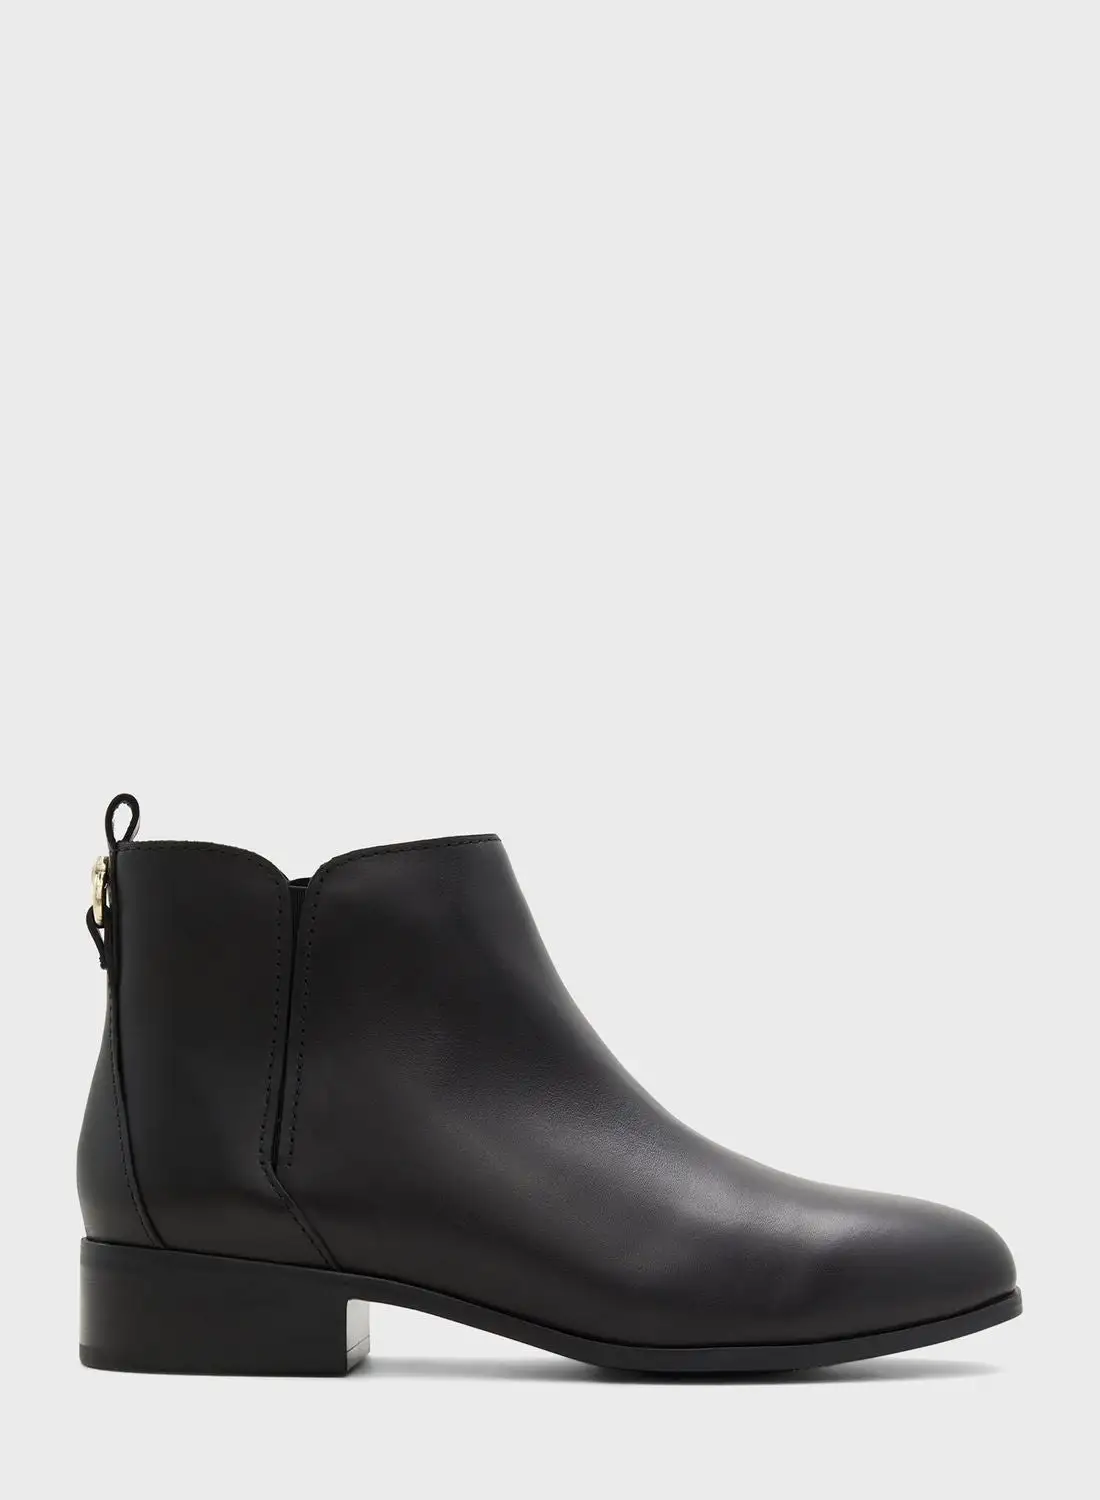 ALDO Verity Ankle Boots